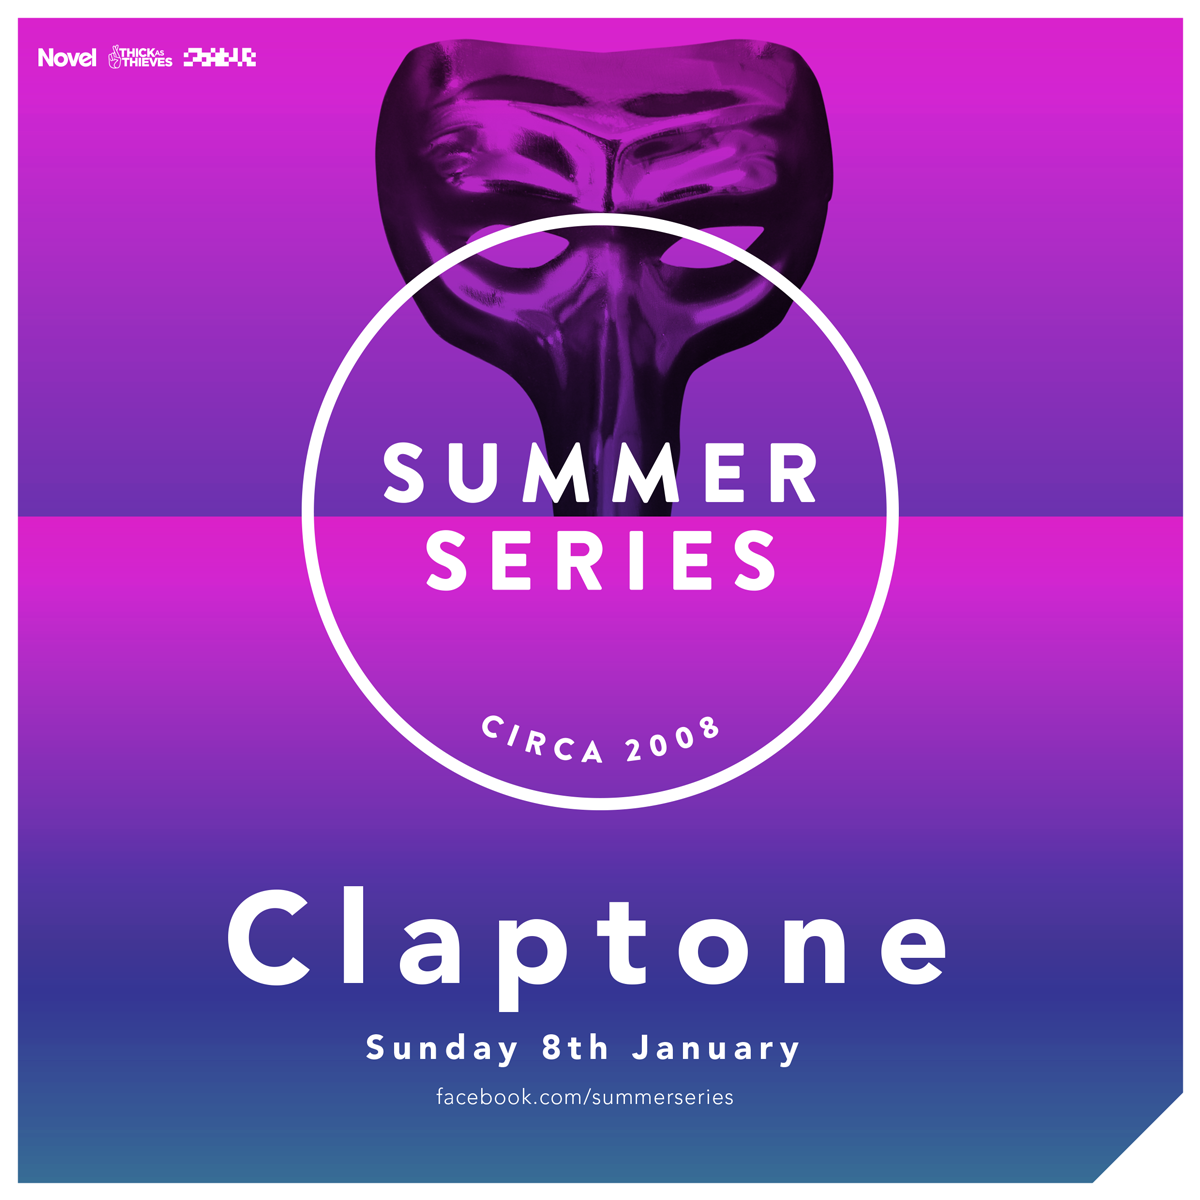 Summer Series with Claptone